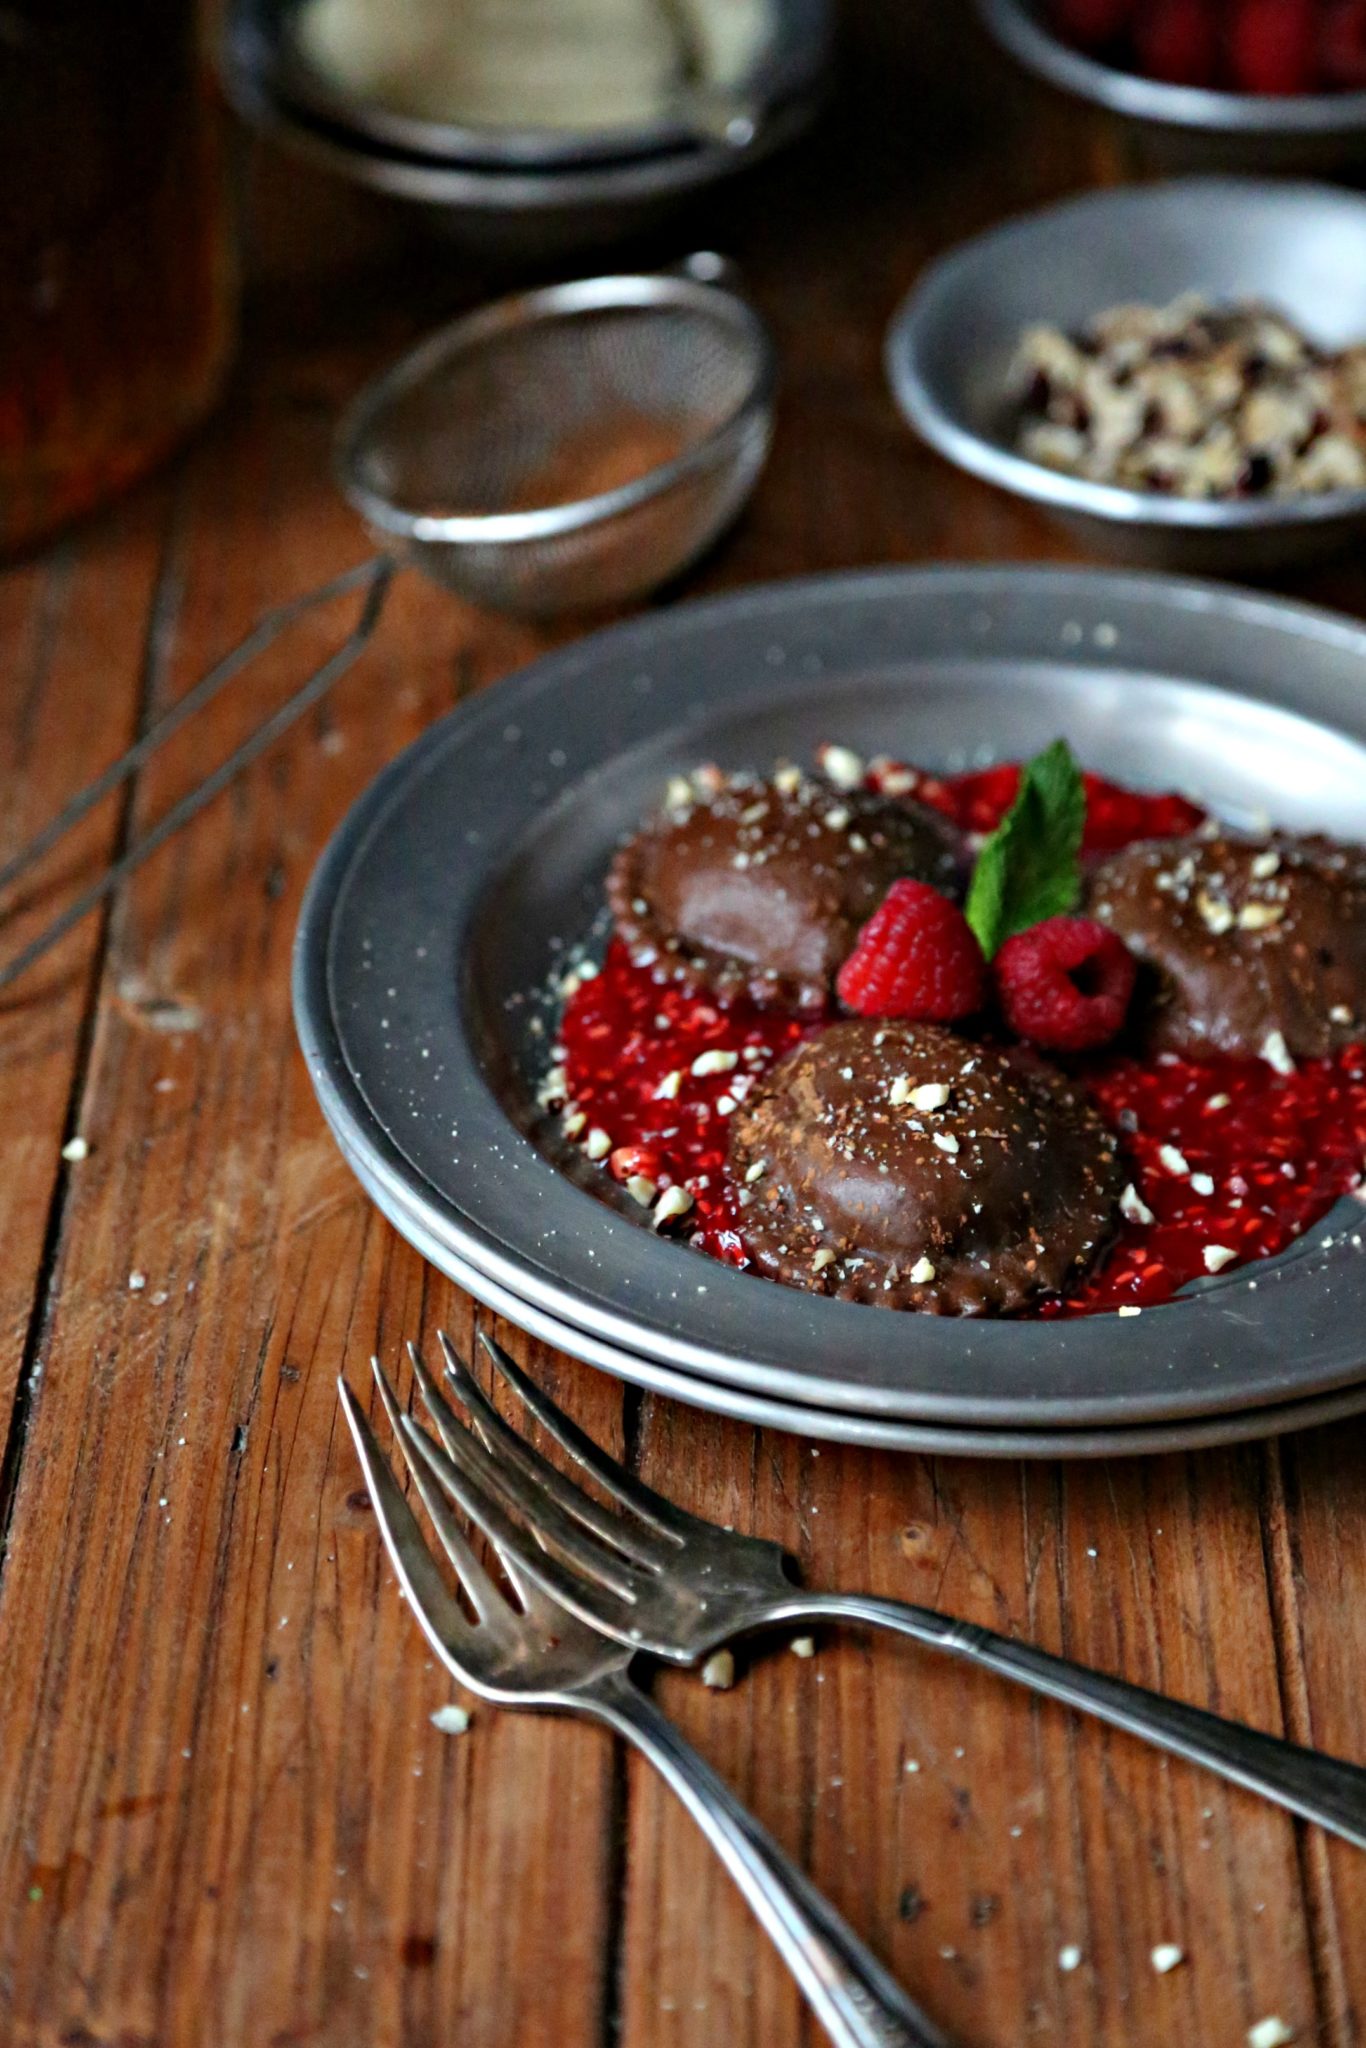 chocolate ravioli on a silver plate with raspberry puree and chopped nuts with 2 silver forks. Small silver bowls of nuts, raspberries and a small sifter with cocoa powder in background.